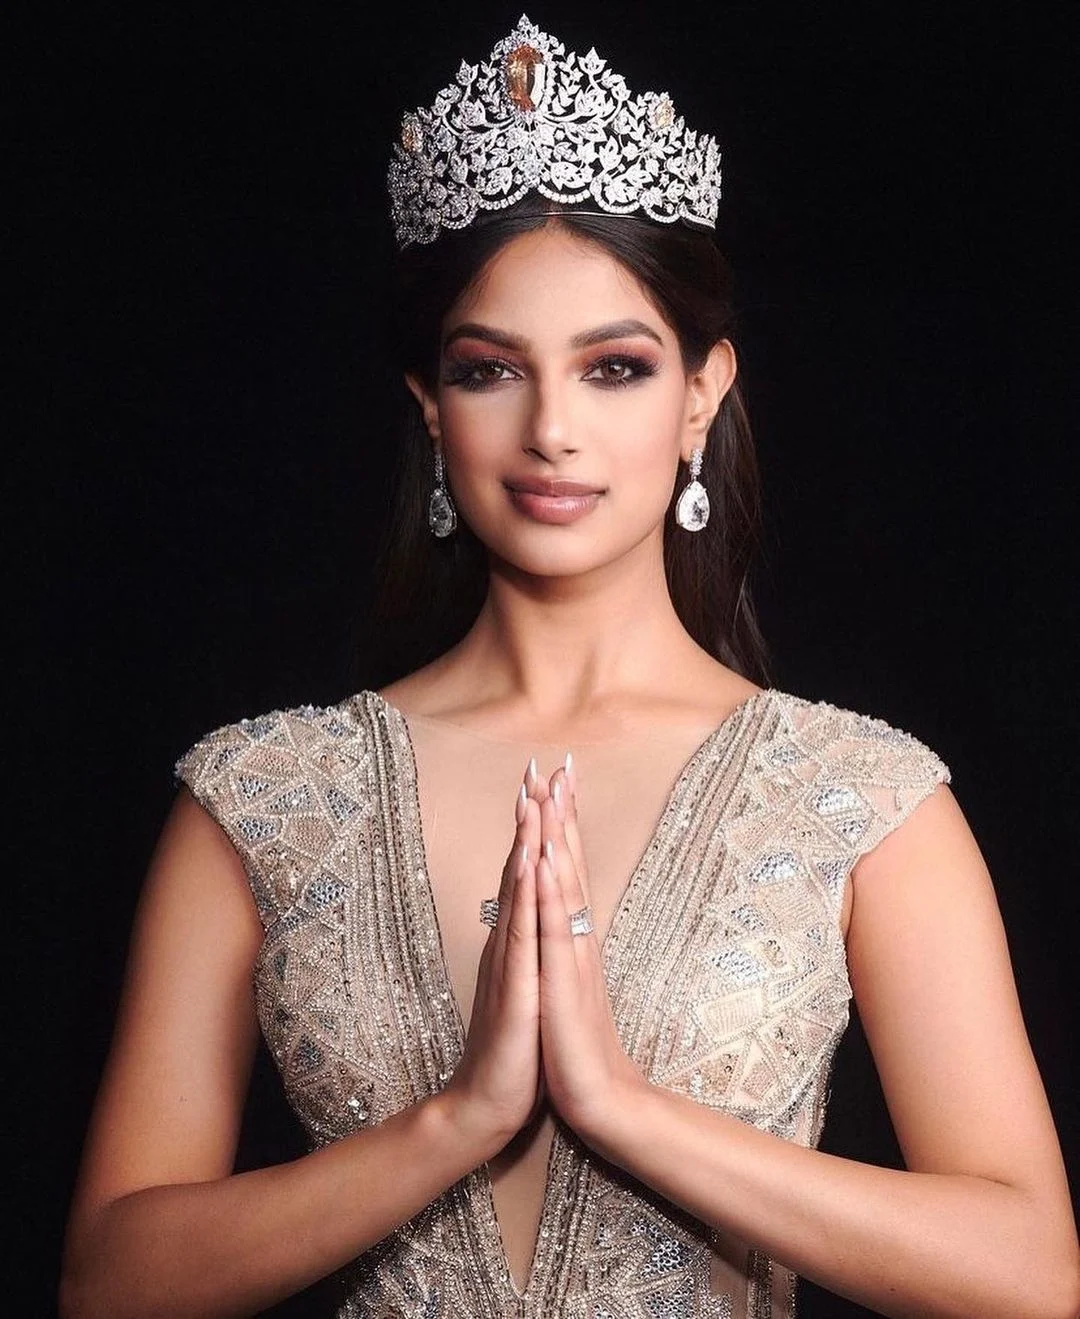 Top 40 pictures of Harnaaz Kour Sandhu 2021 Miss Universe